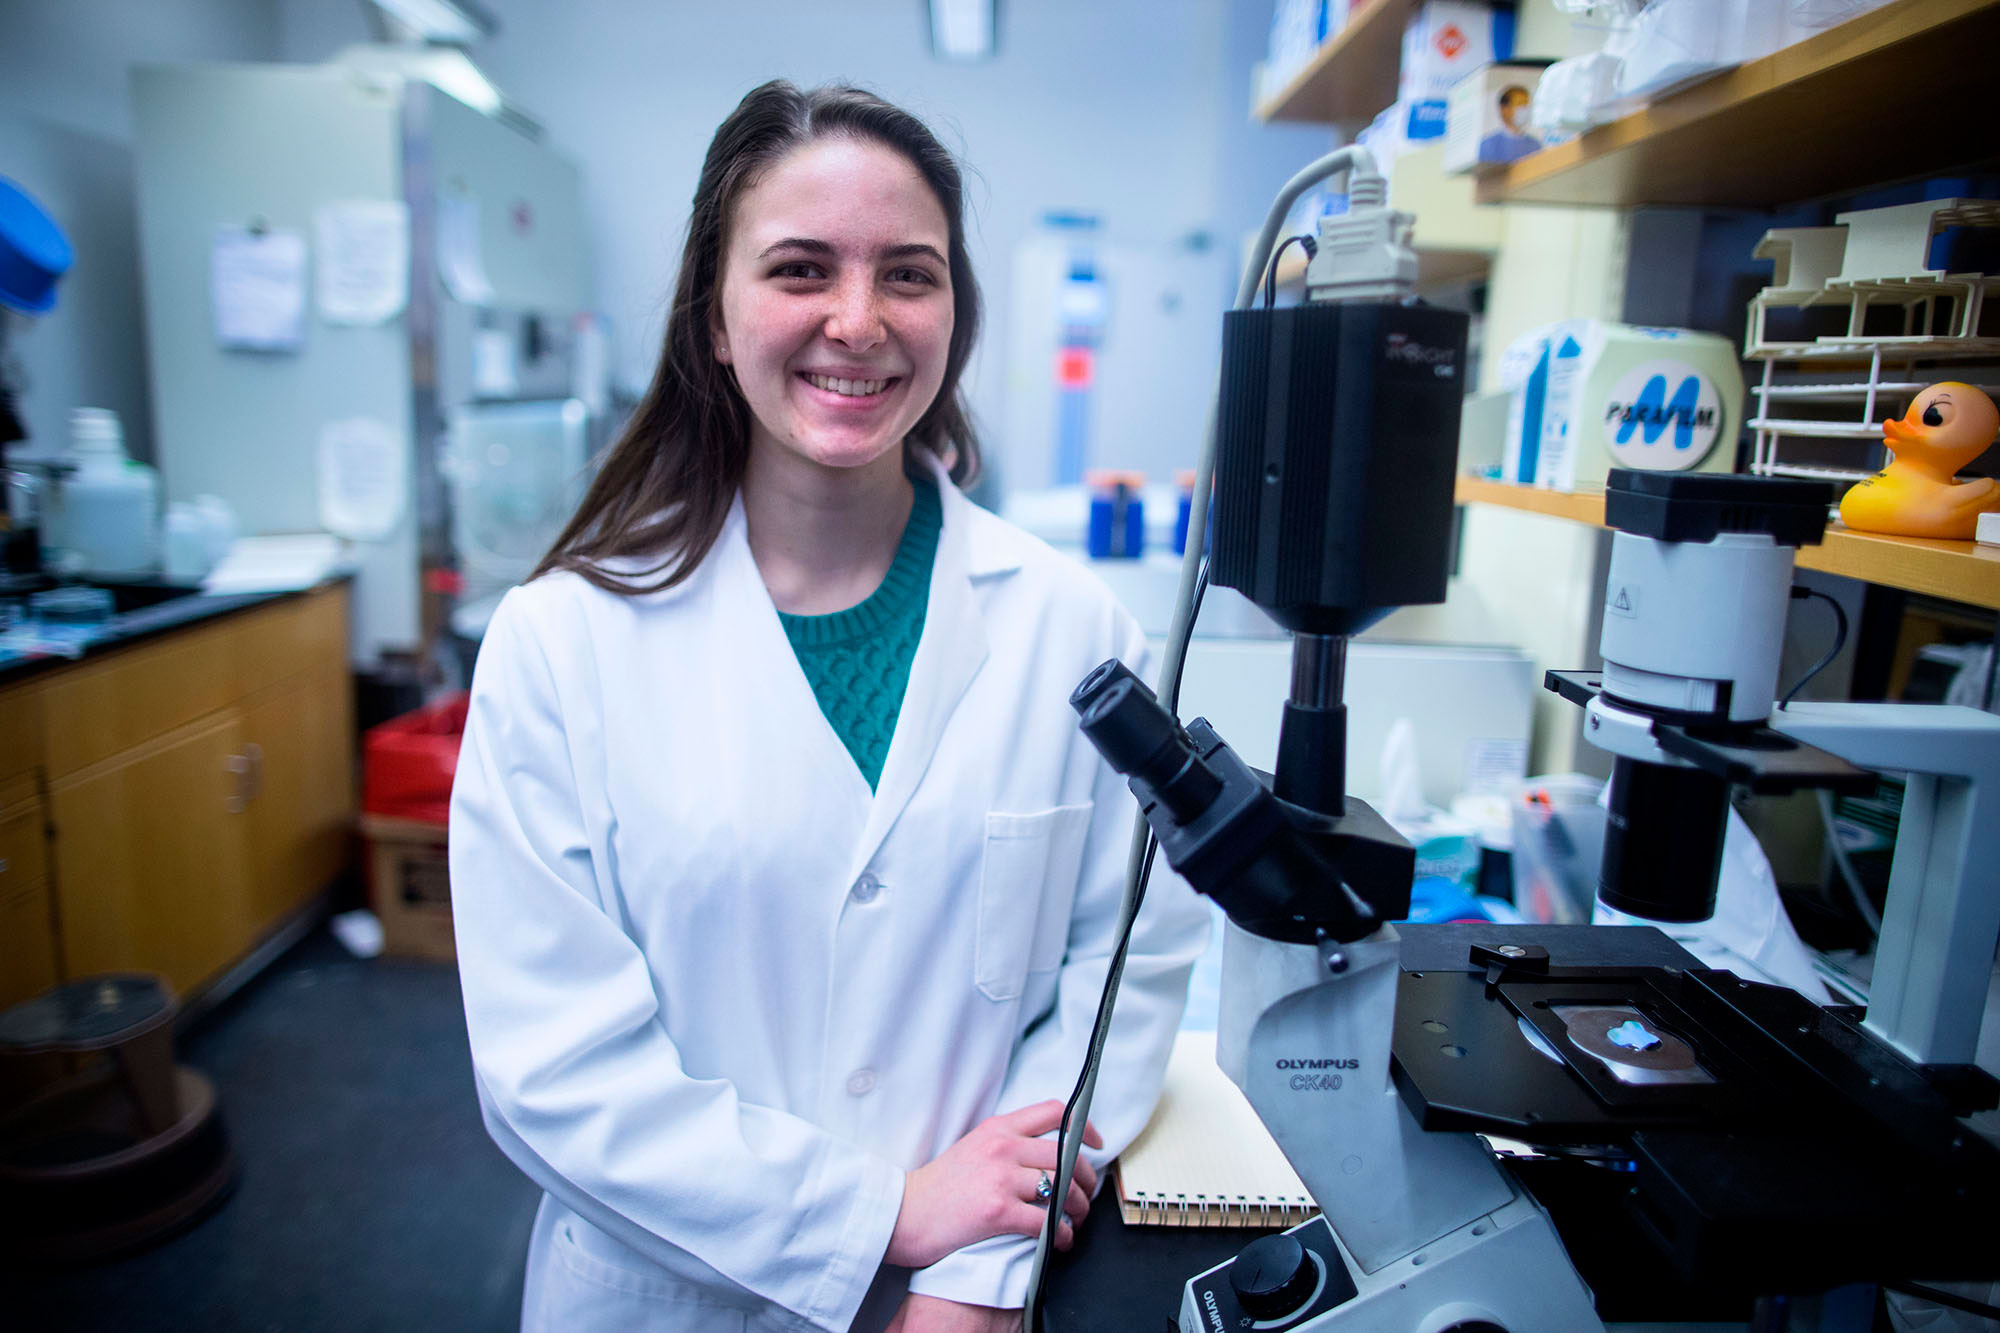 Rachel Stadler, a biomedical engineering major in the School of Engineering and Applied Science, is researching infectious diseases.